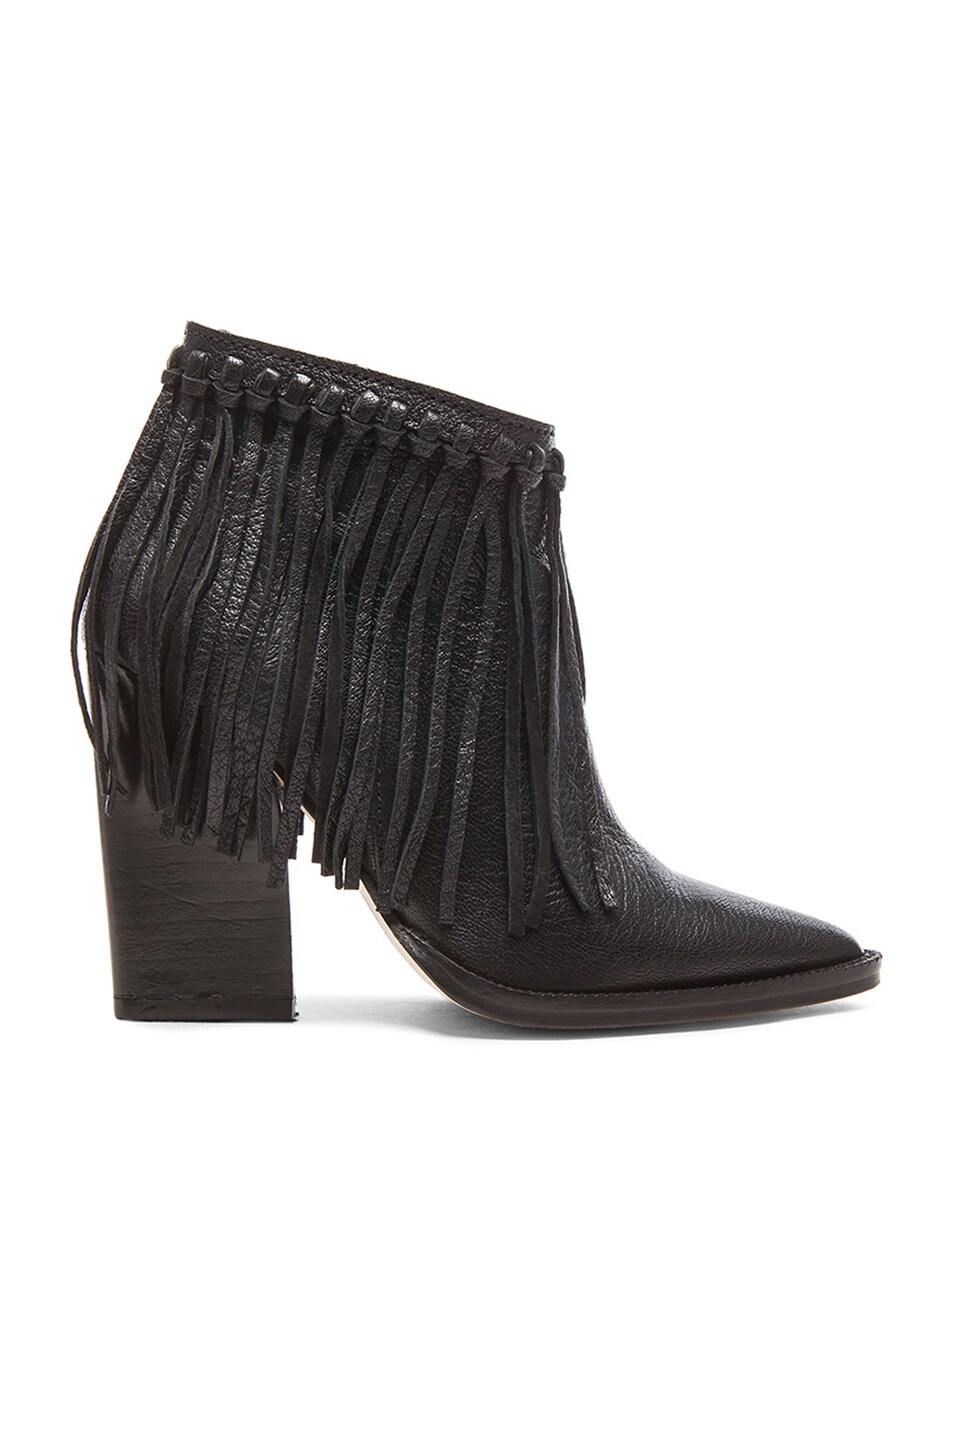 By Malene Birger Ounni Leather Booties in Black | FWRD